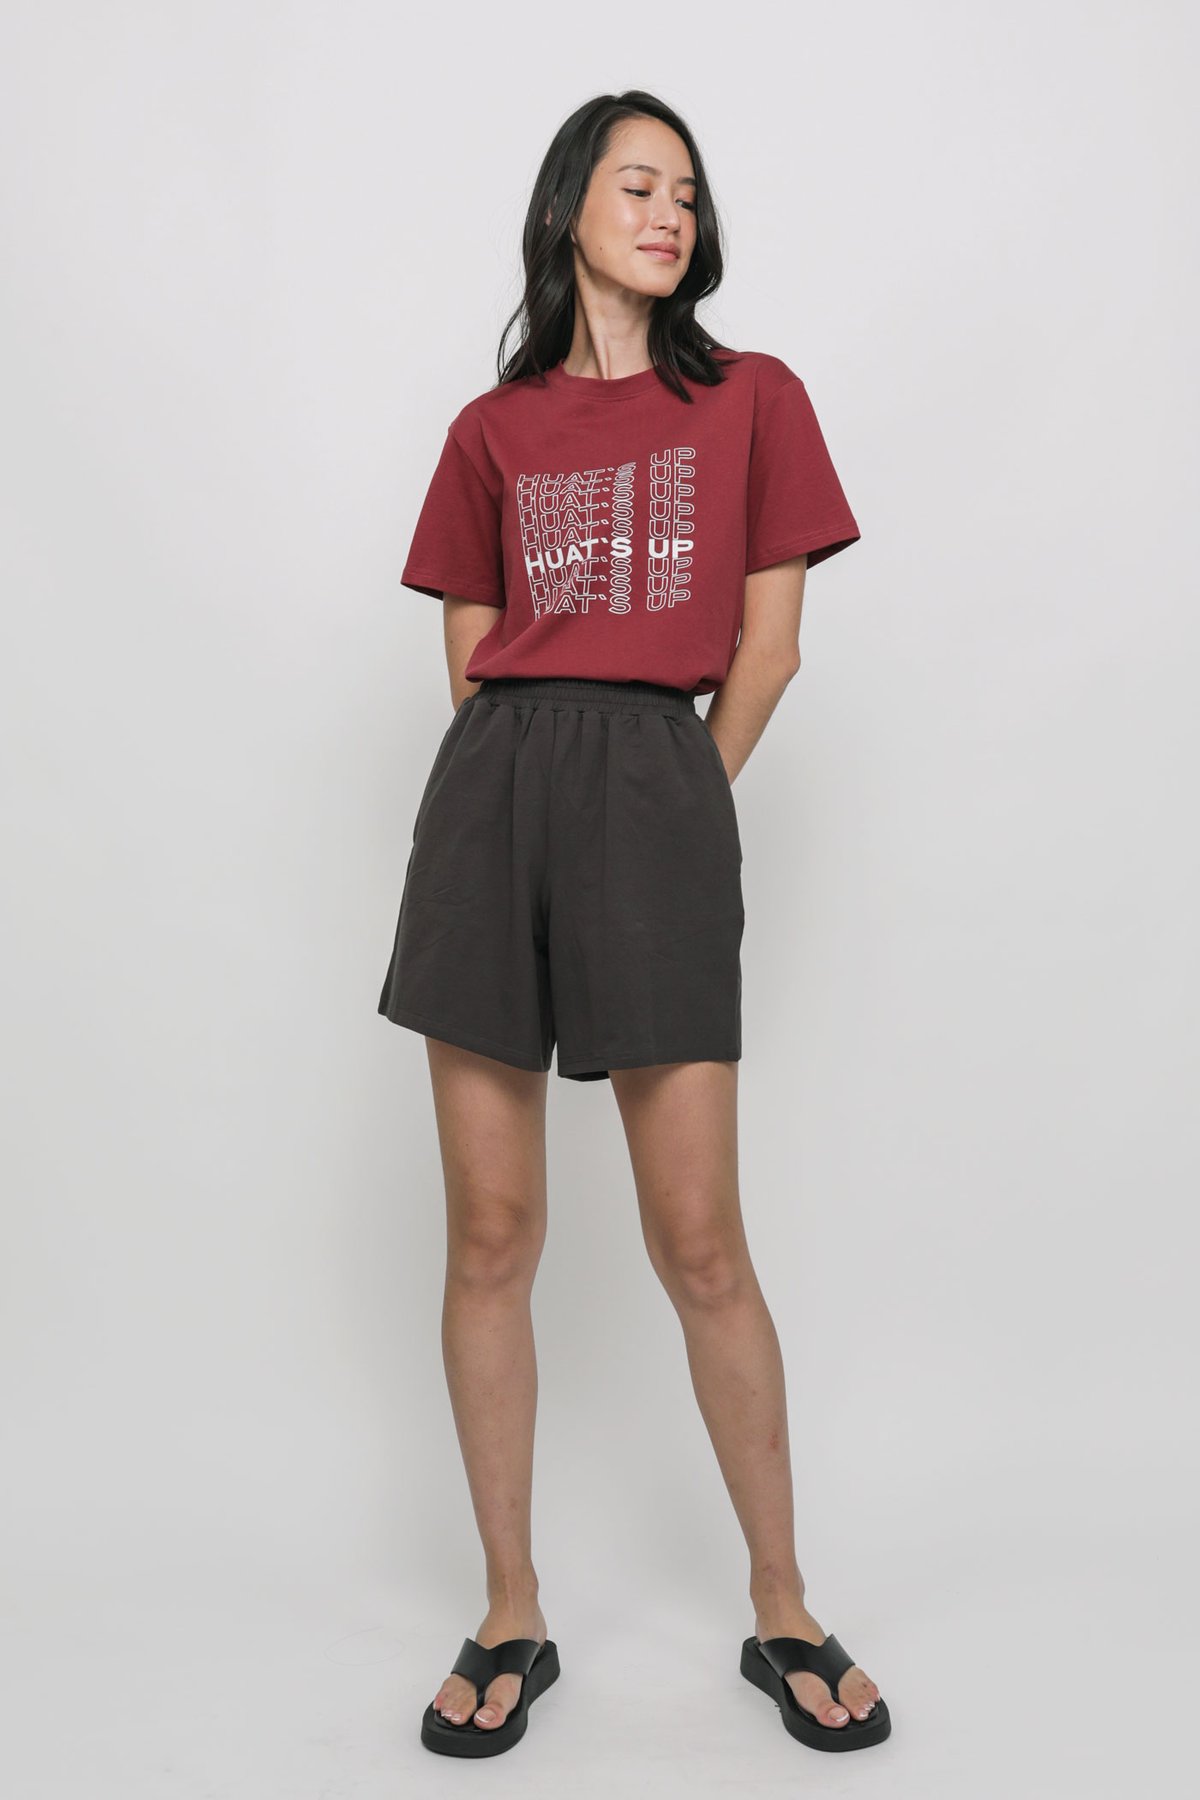 Huat's Up Tee (Maroon) Limited Edition